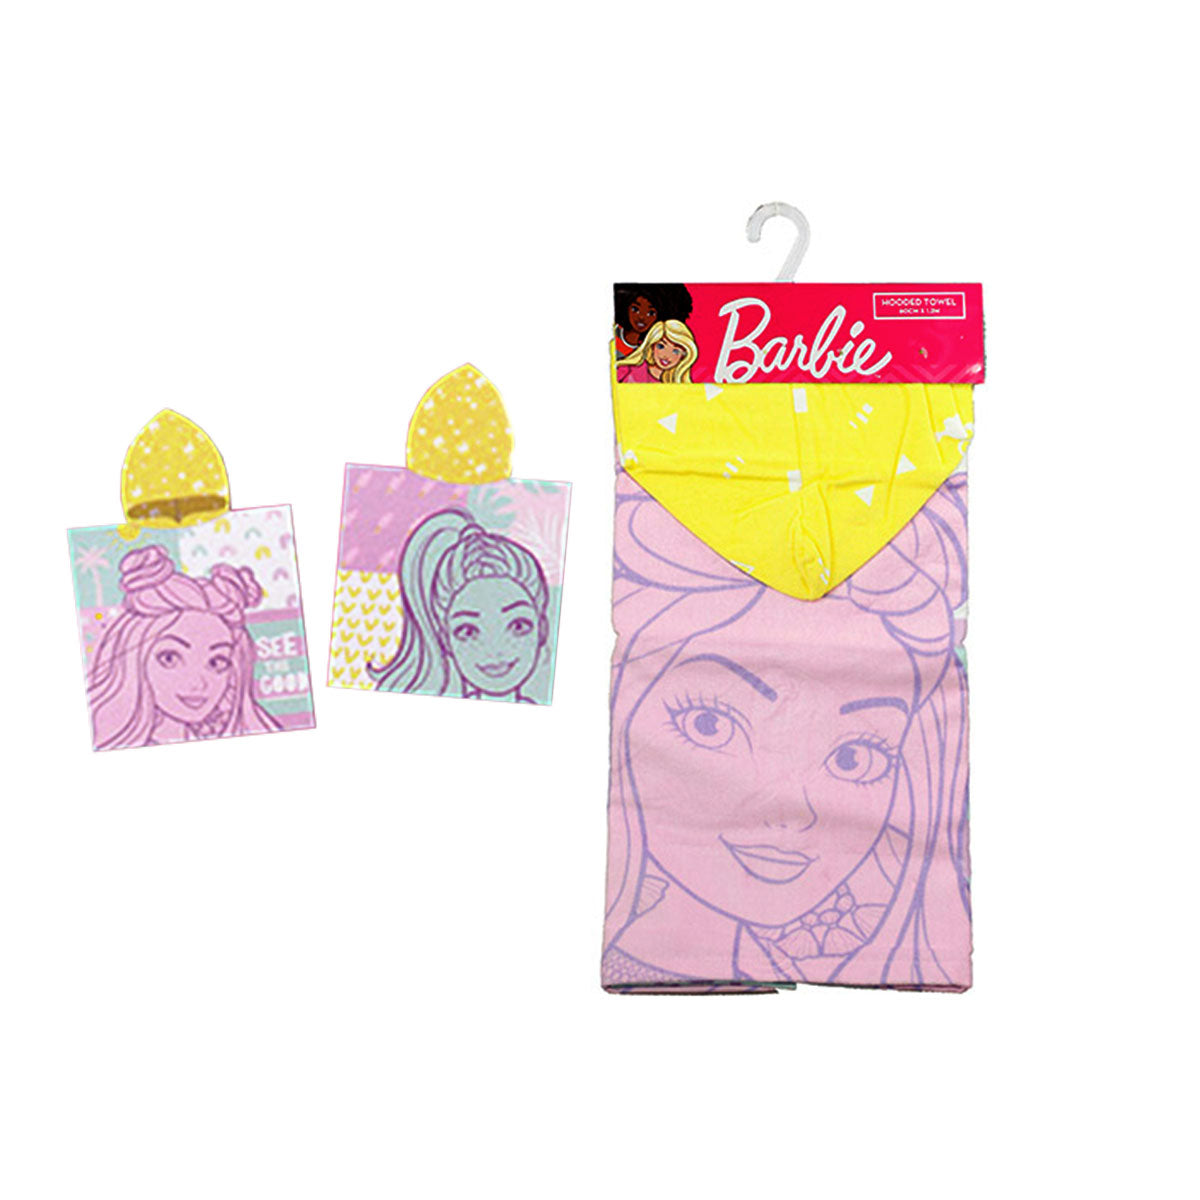 Barbie See the Good Cotton Hooded Licensed Towel 60 x 120 cm